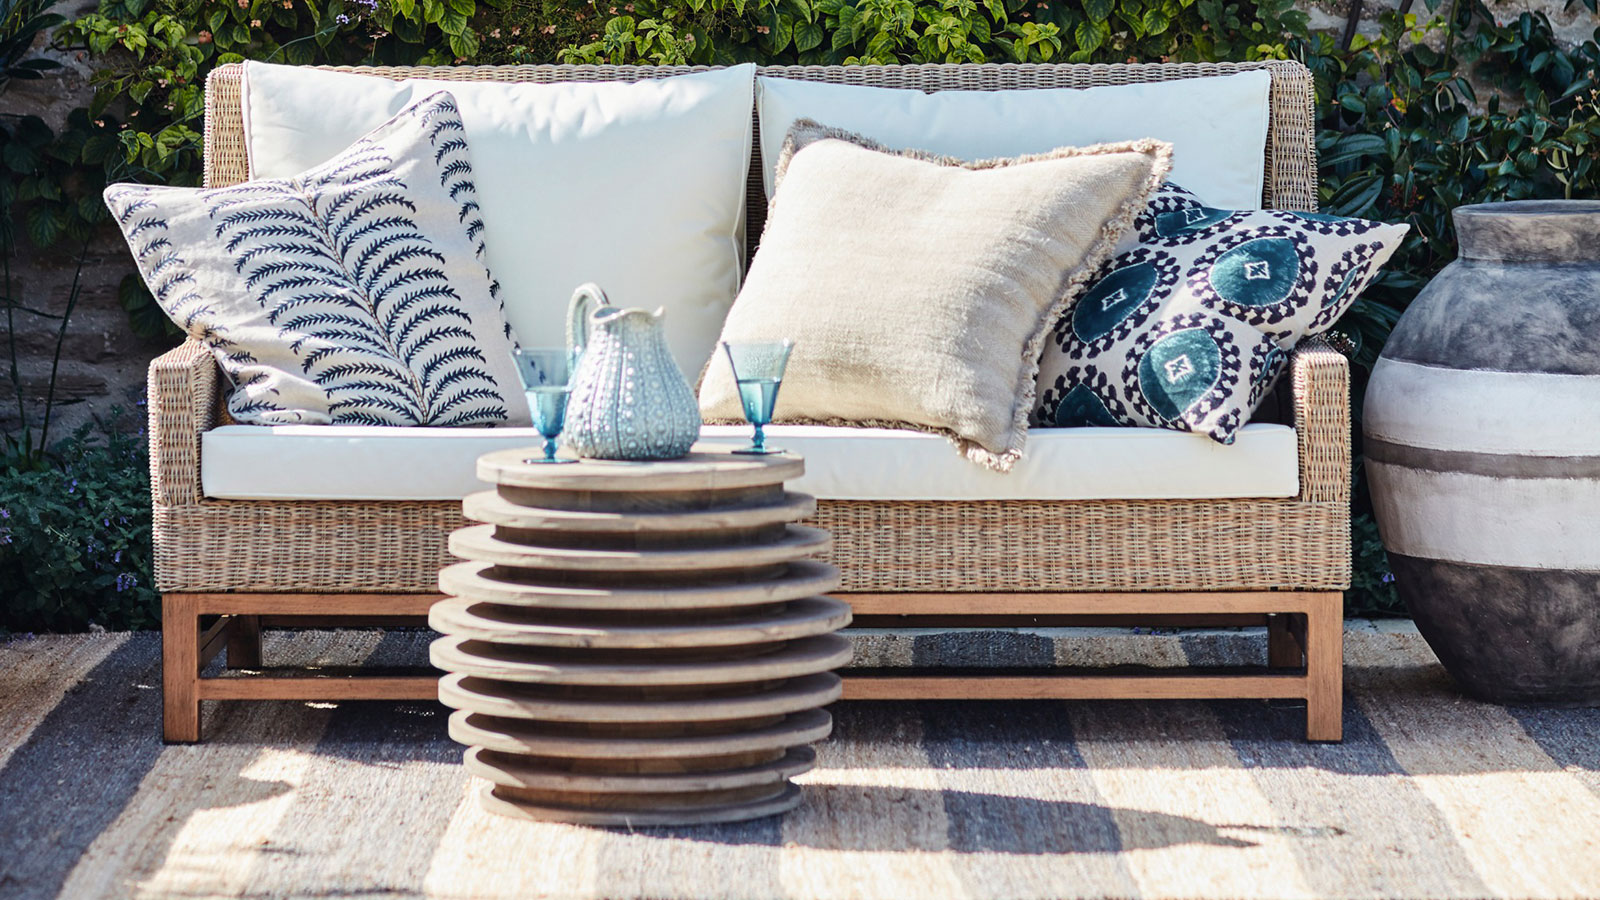 How to clean an outdoor rug in 6 simple steps